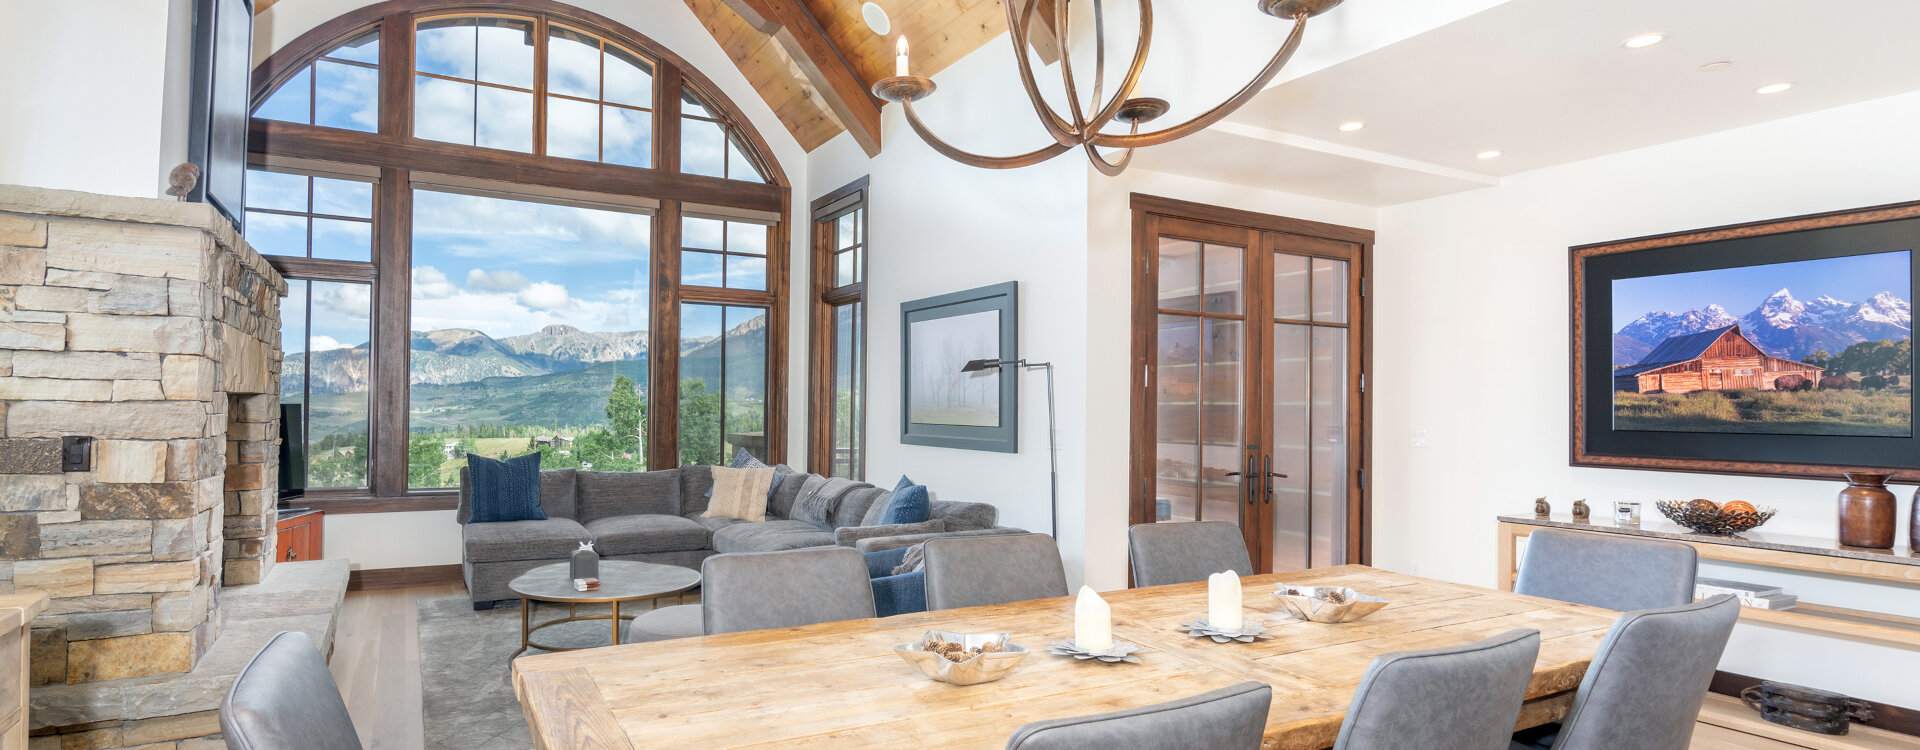 1.1-telluride-aspens-at-courcheval-dining-to-living-room